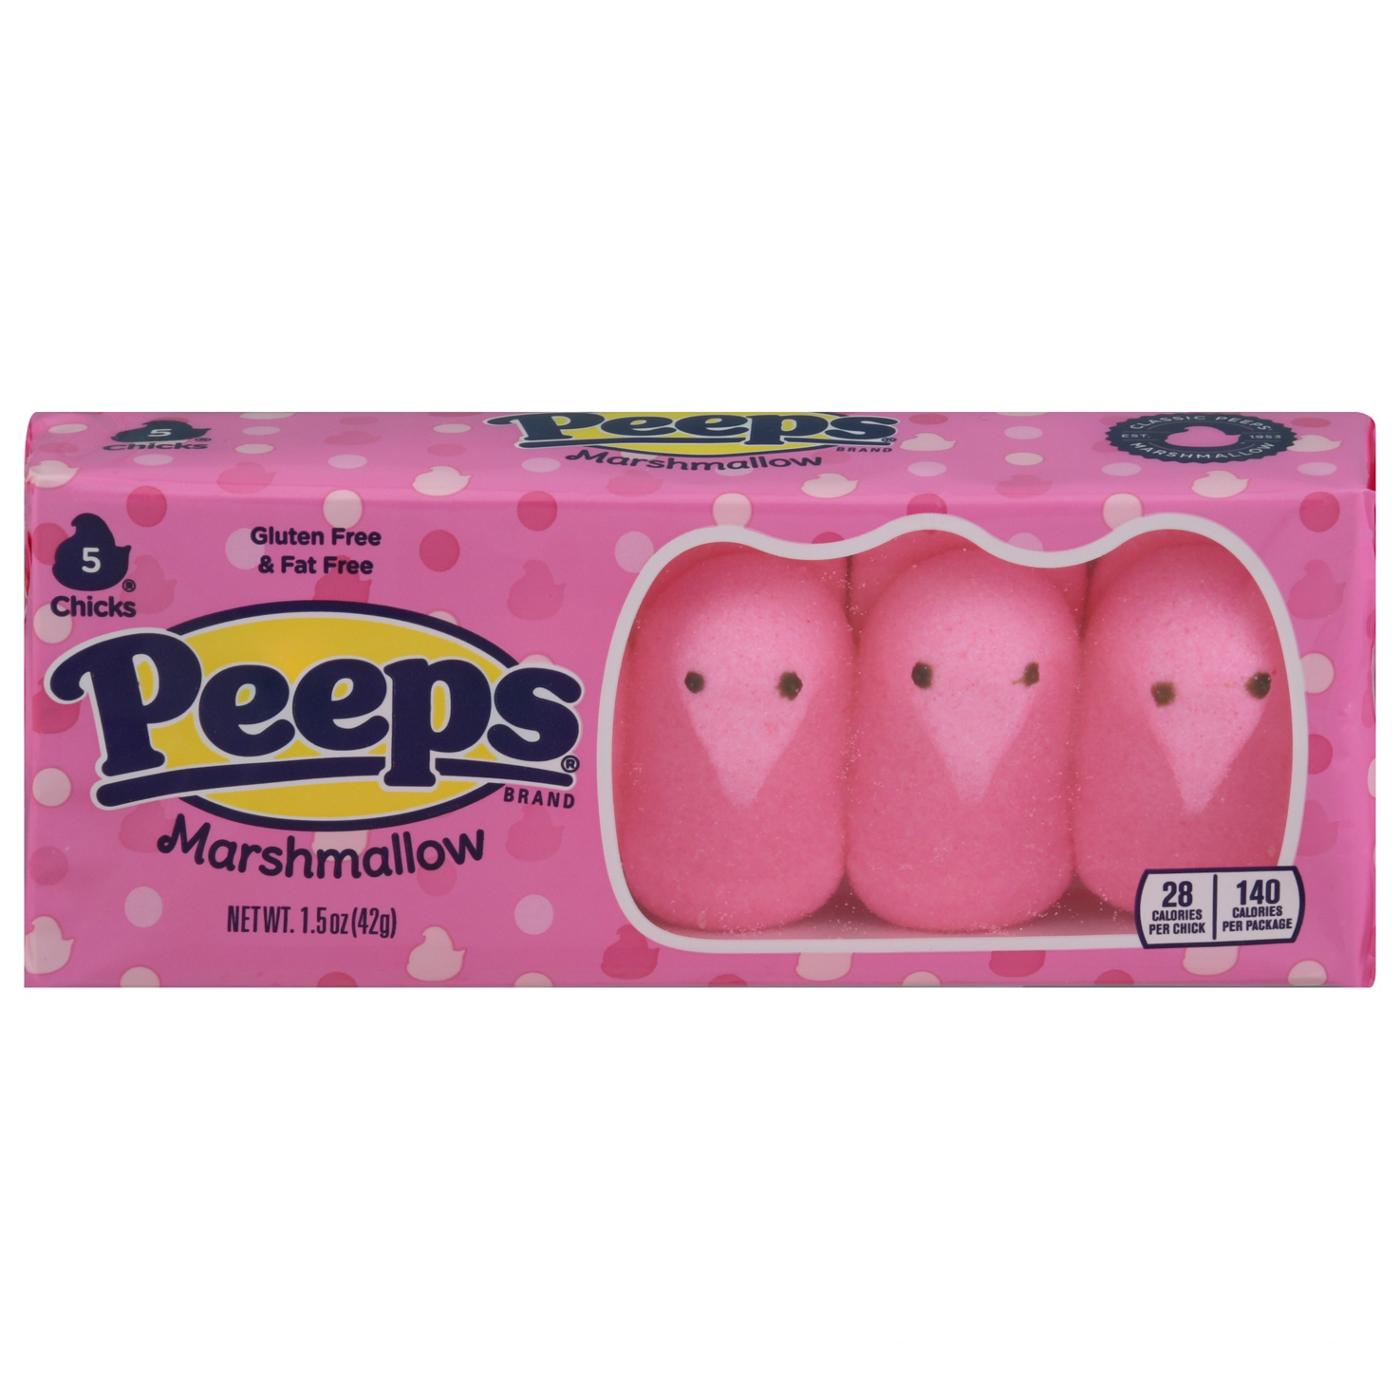 Peeps Marshmallow Easter Chicks - Pink; image 1 of 2